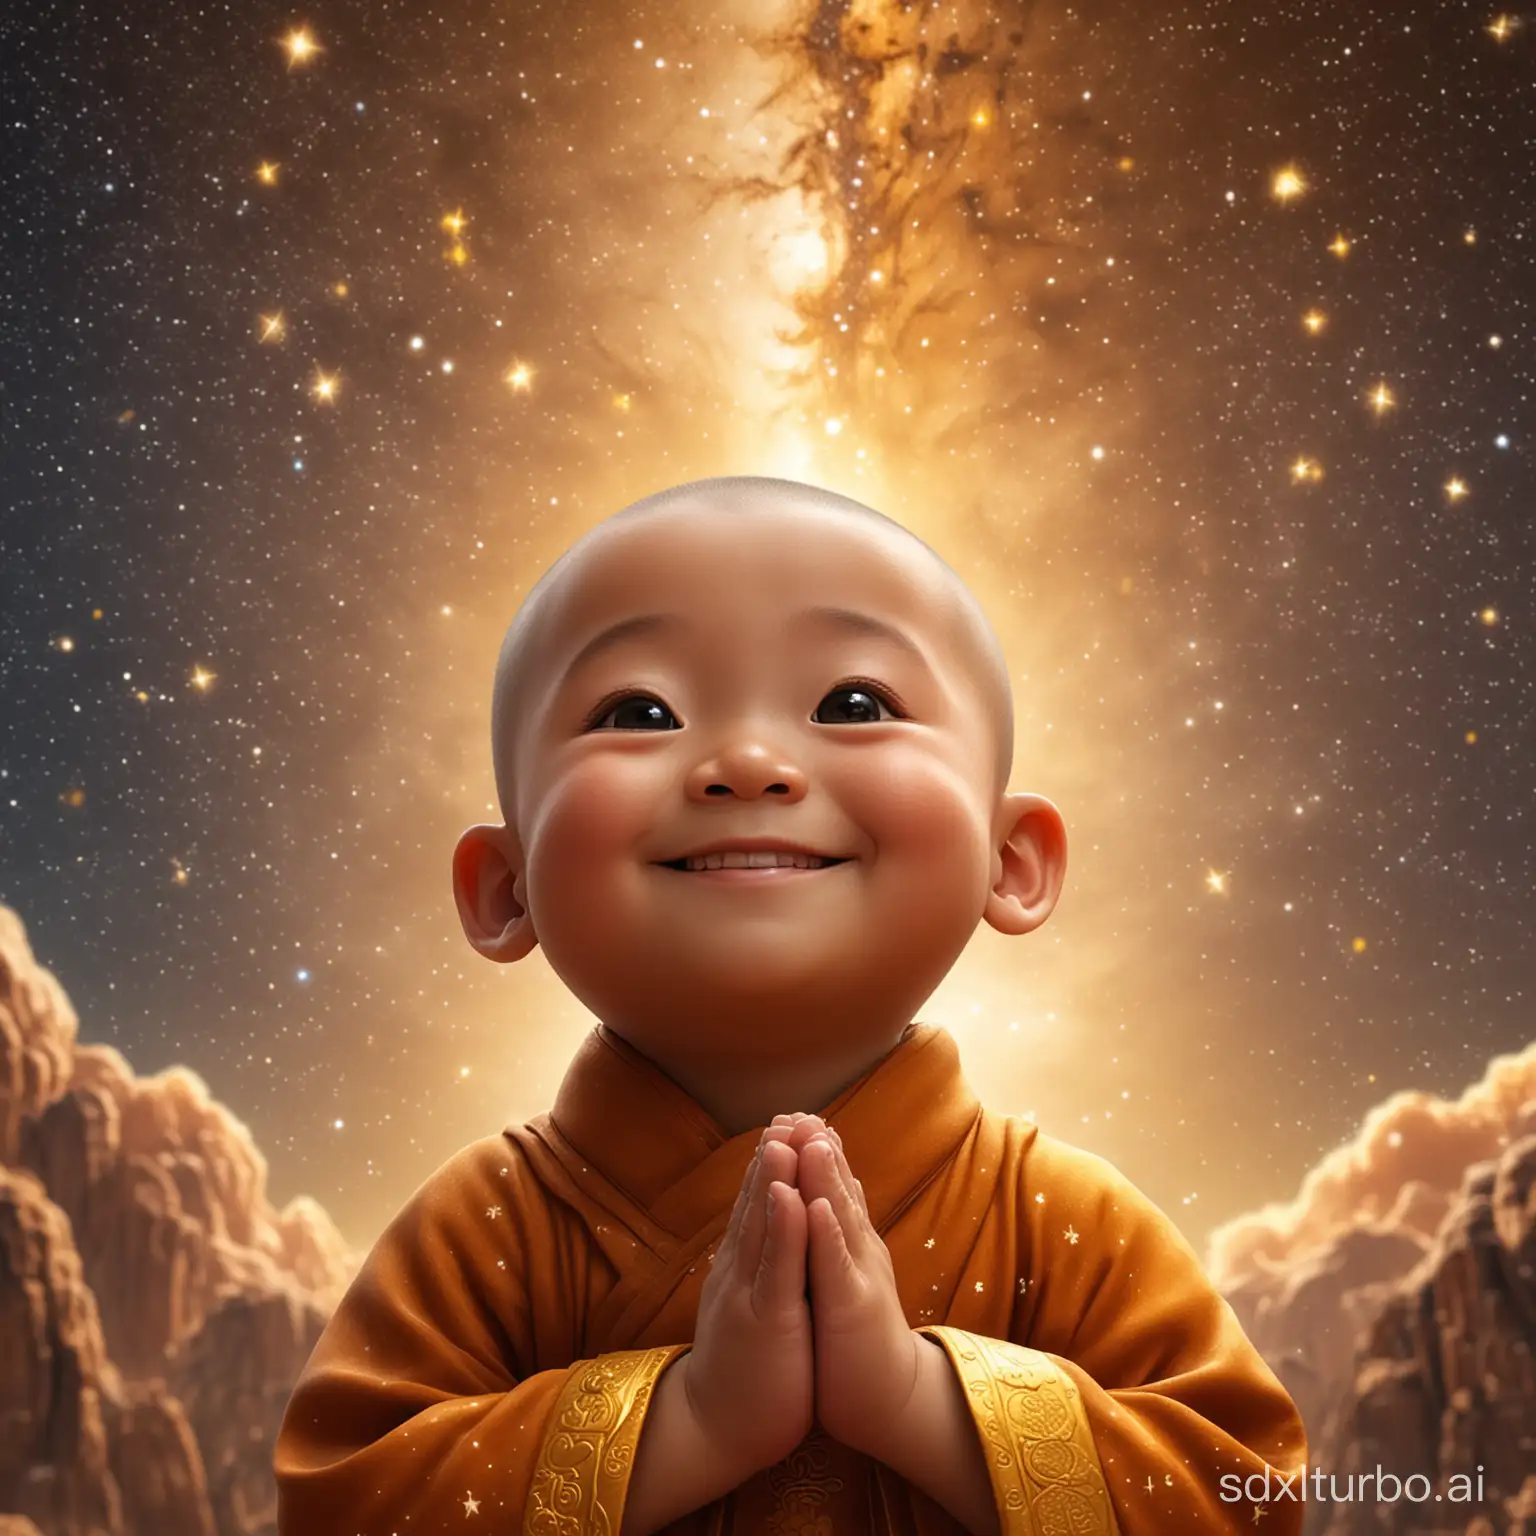 Smiling-Little-Chinese-Monk-Gazing-at-Starry-Sky-with-Folded-Hands